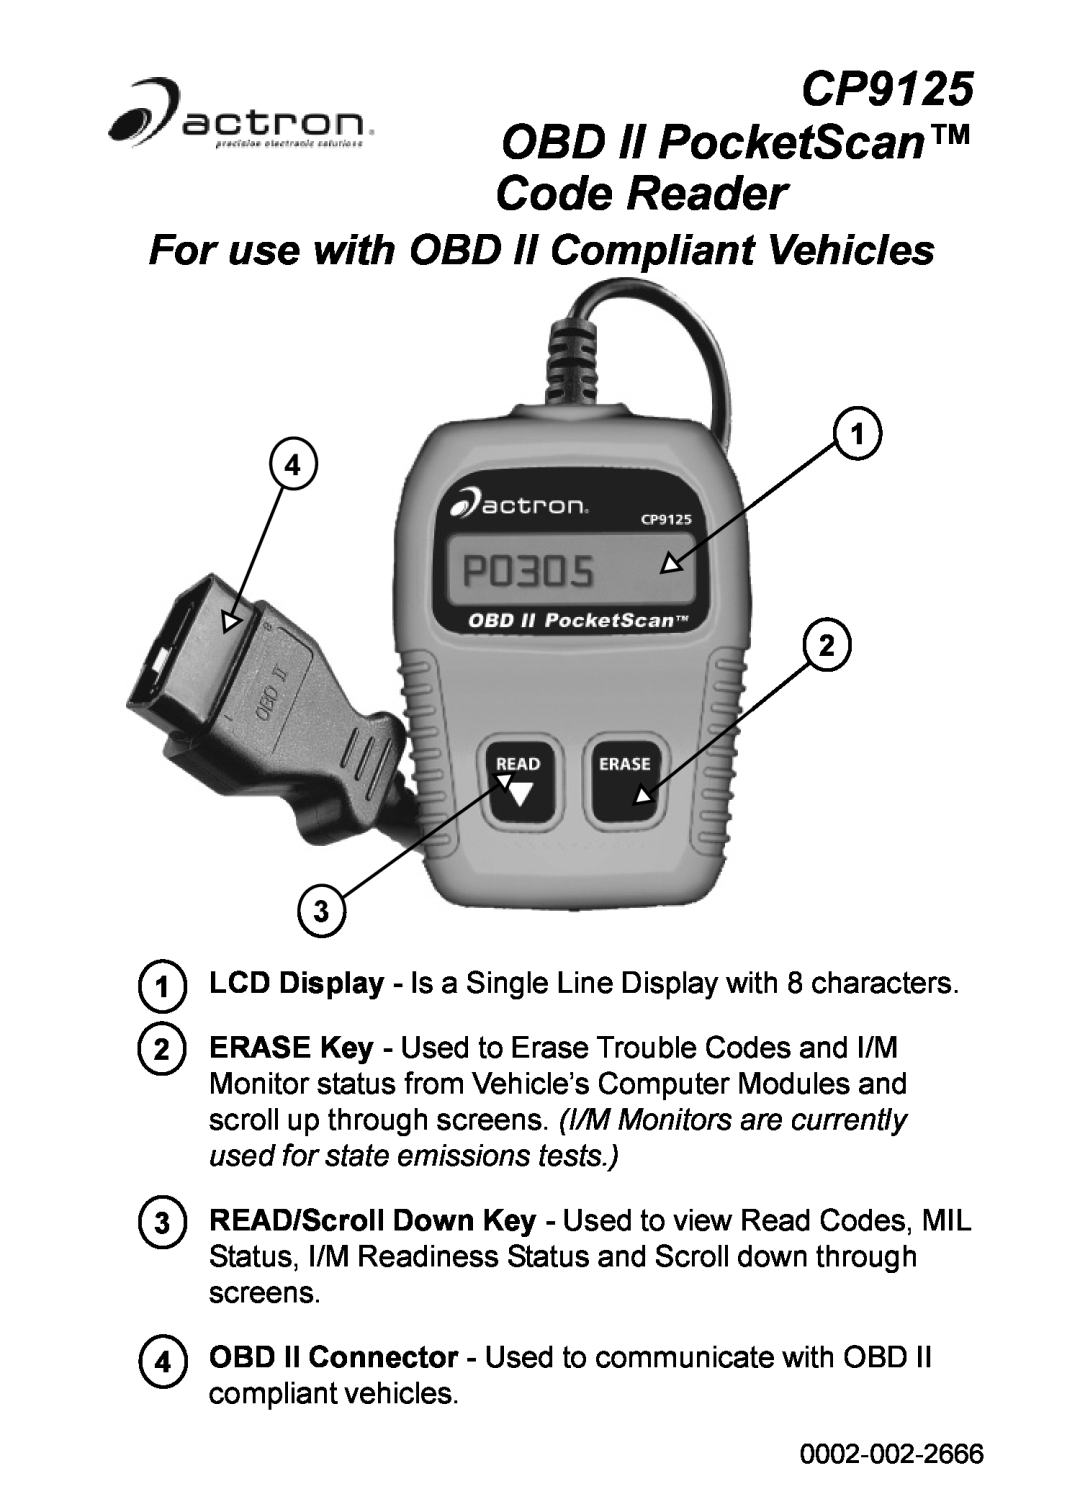 Actron manual CP9125 OBD II PocketScan Code Reader, For use with OBD II Compliant Vehicles 